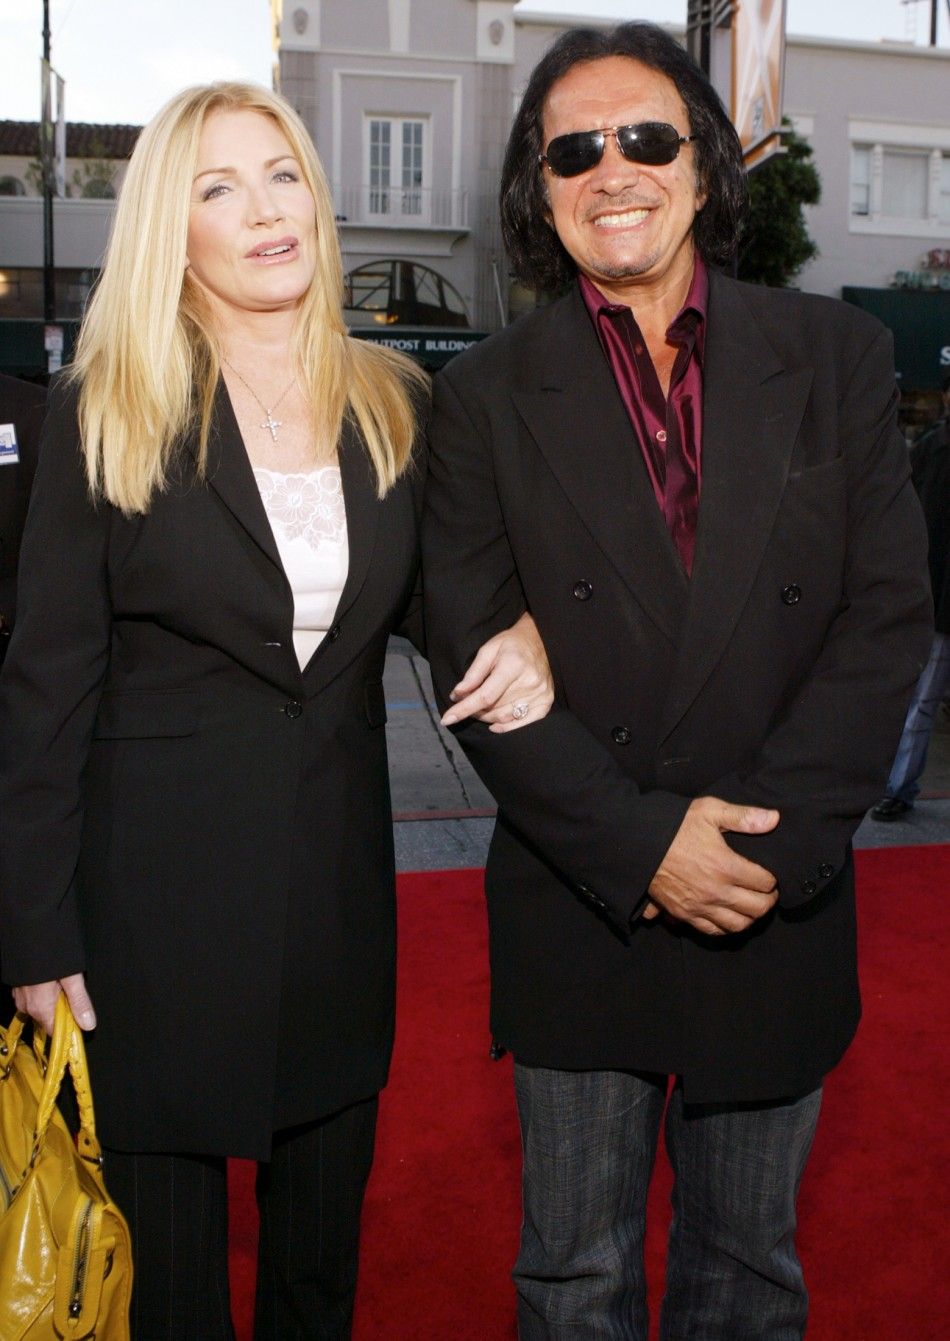 U.S. actress Shannon Tweed and husband U.S. rock musician Gene Simmons arrive for the premiere of quotRizequot at the Egyptian Theatre in Hollywood 